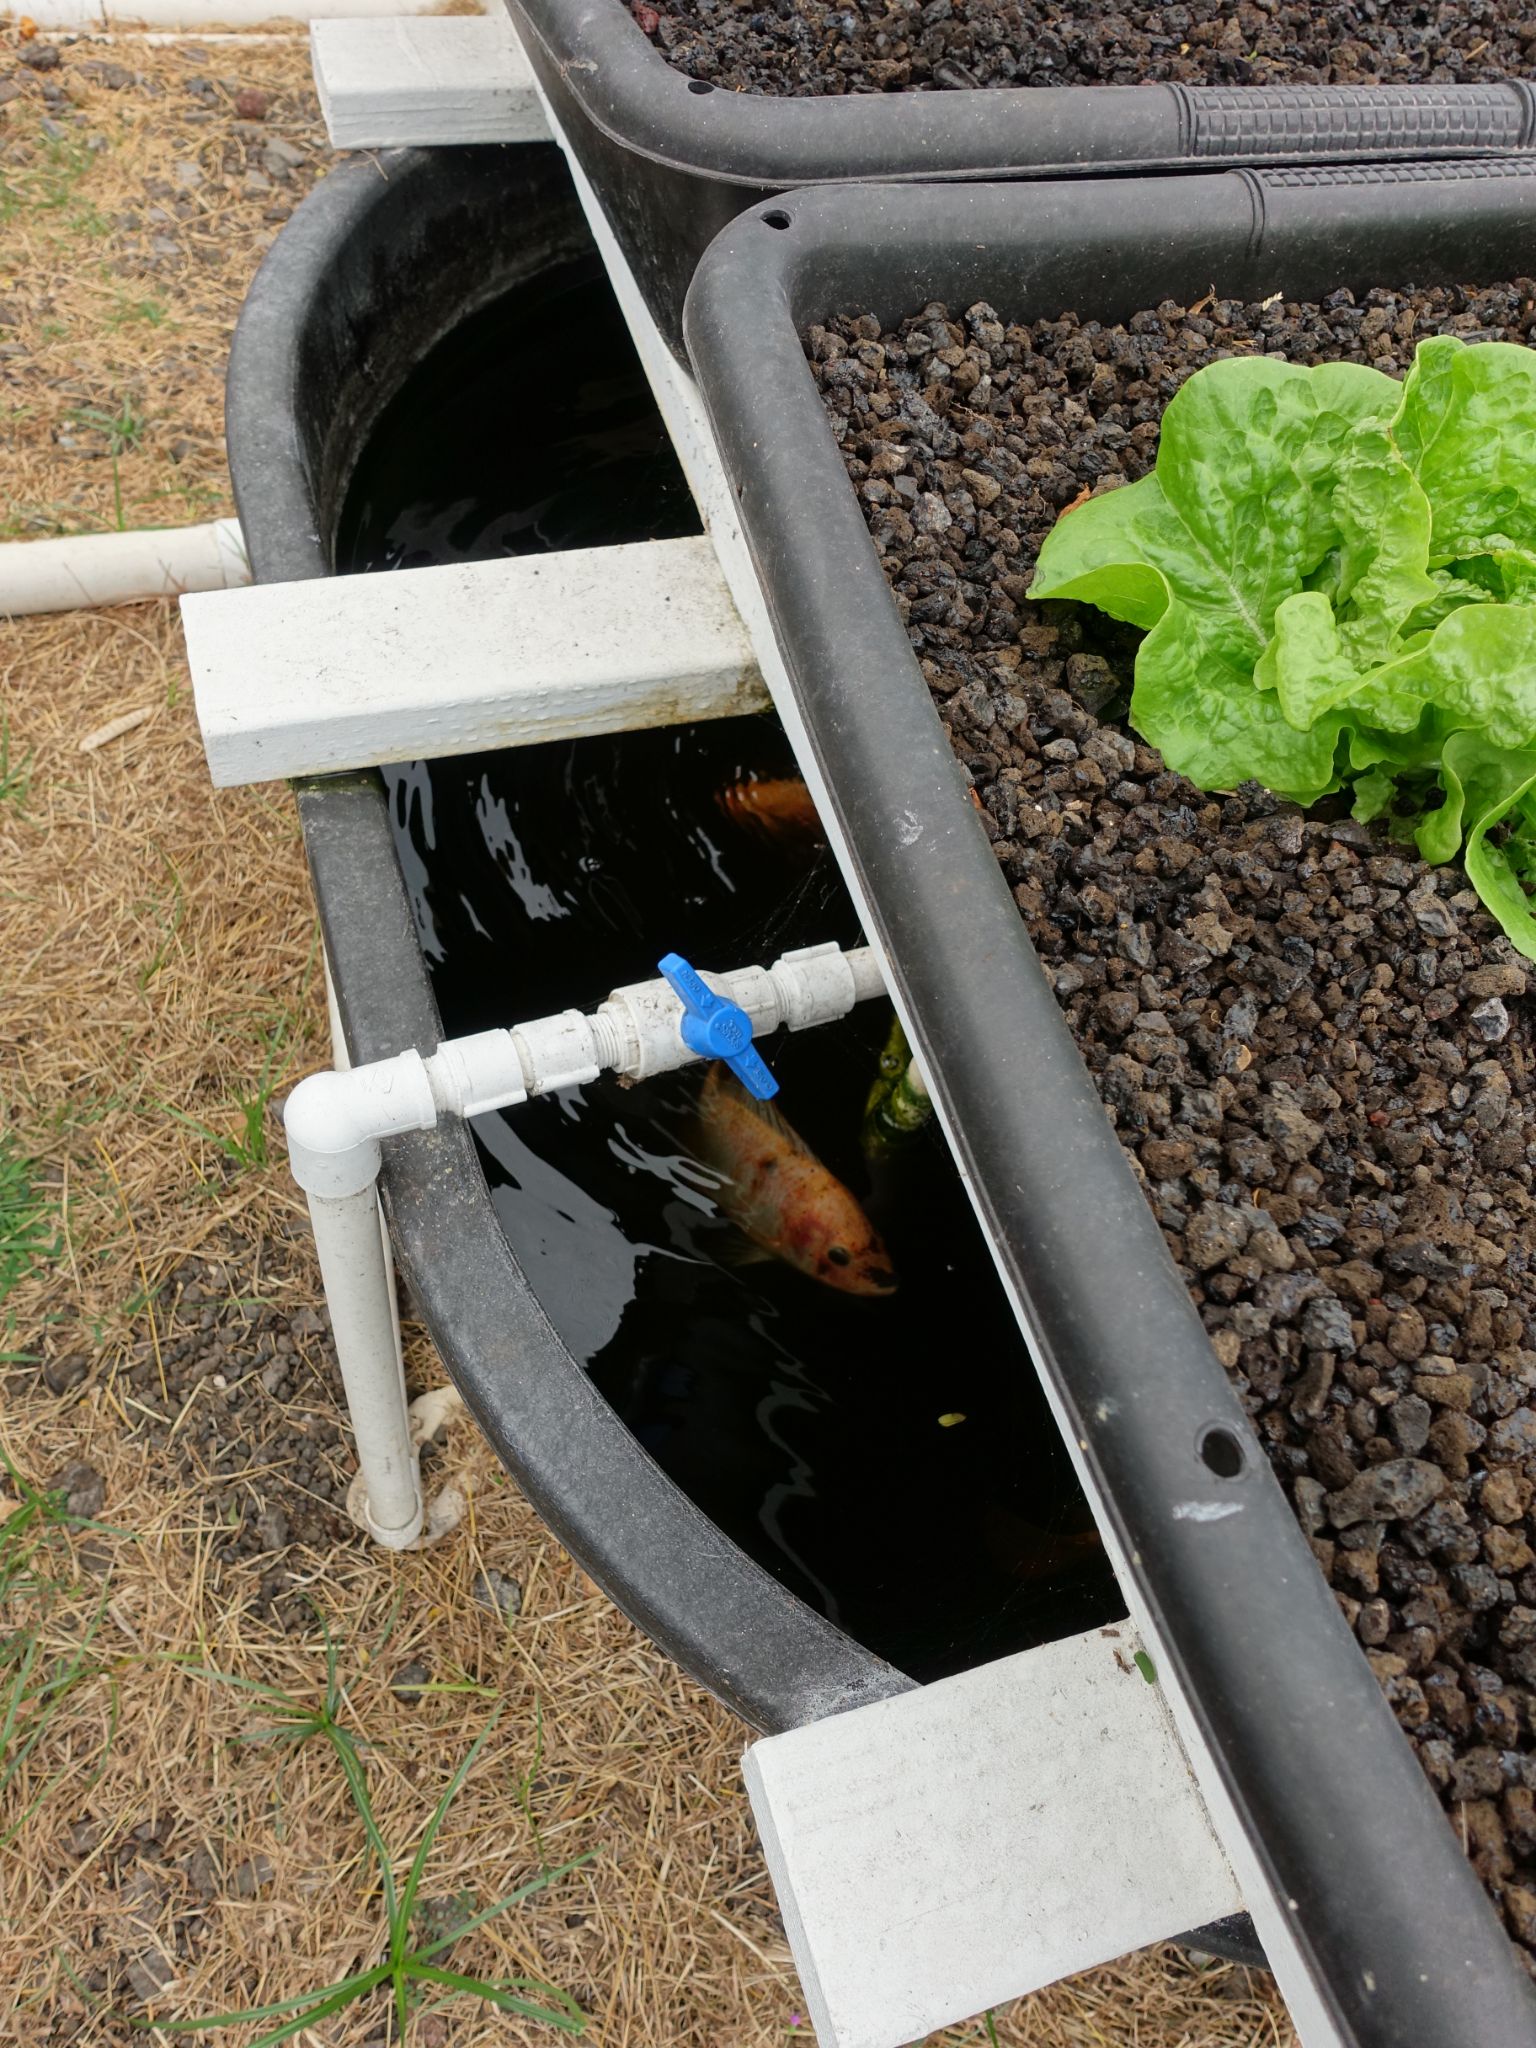 More Than A Trend: Why Hydroponic Produce Is The Future of Growing